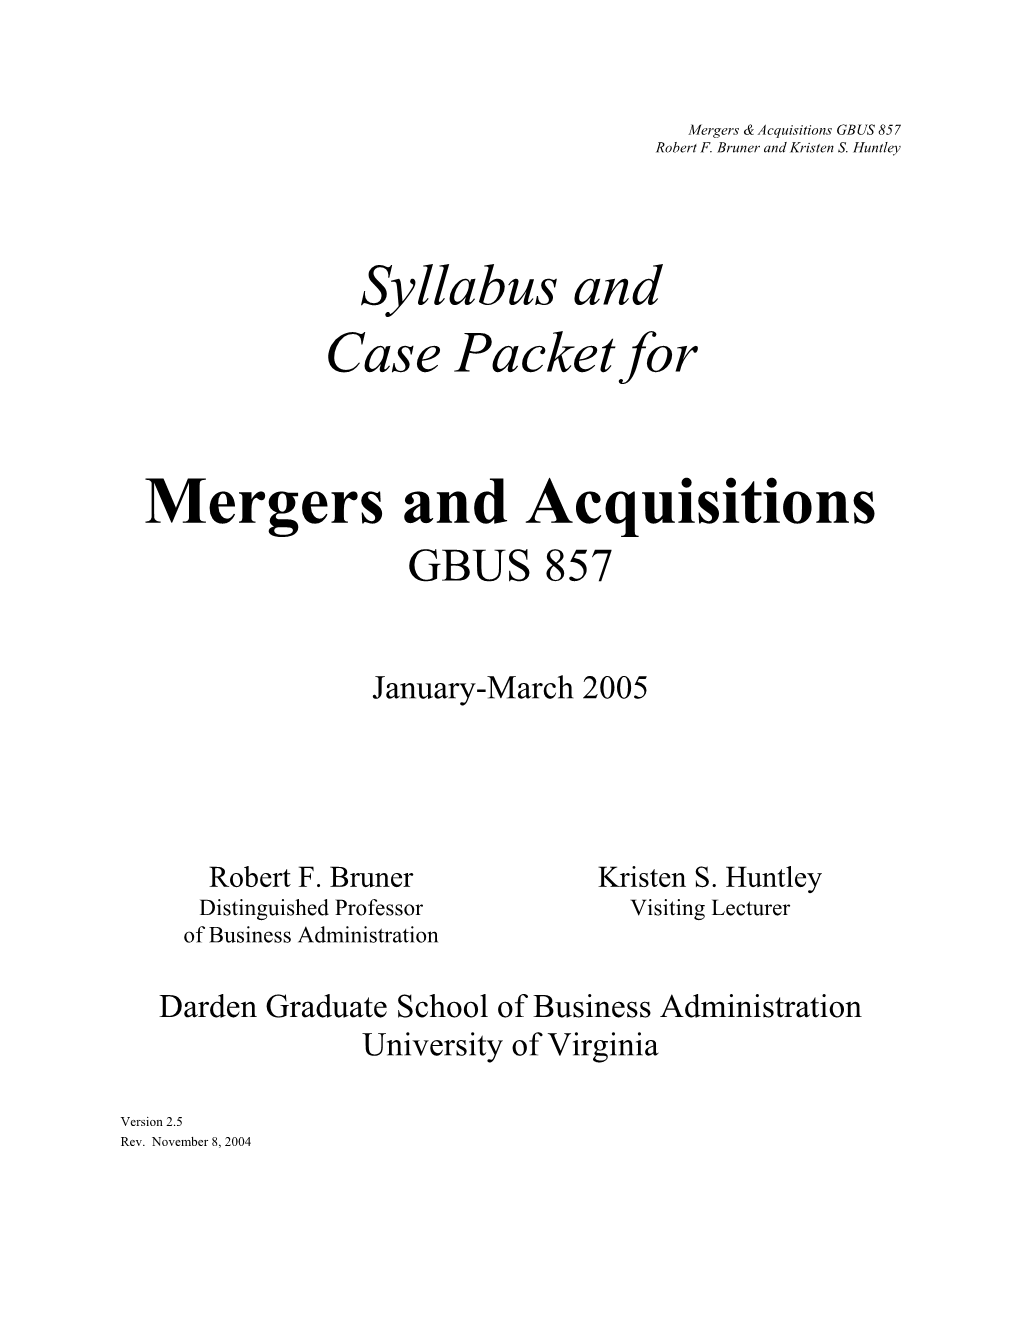 Mergers and Acquisitions GBUS 857